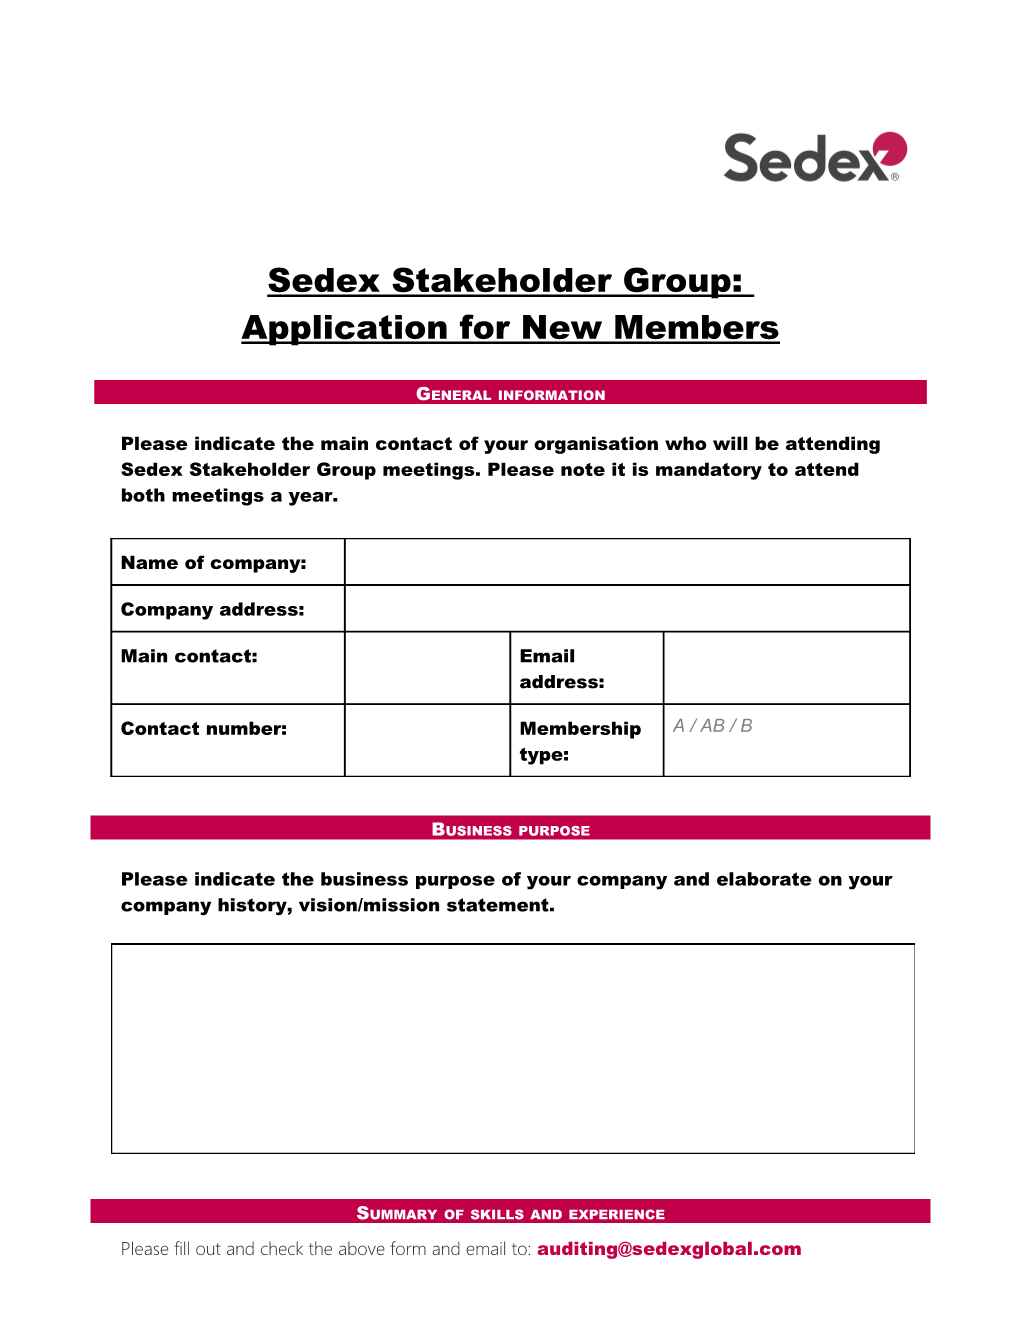 Application for New Members